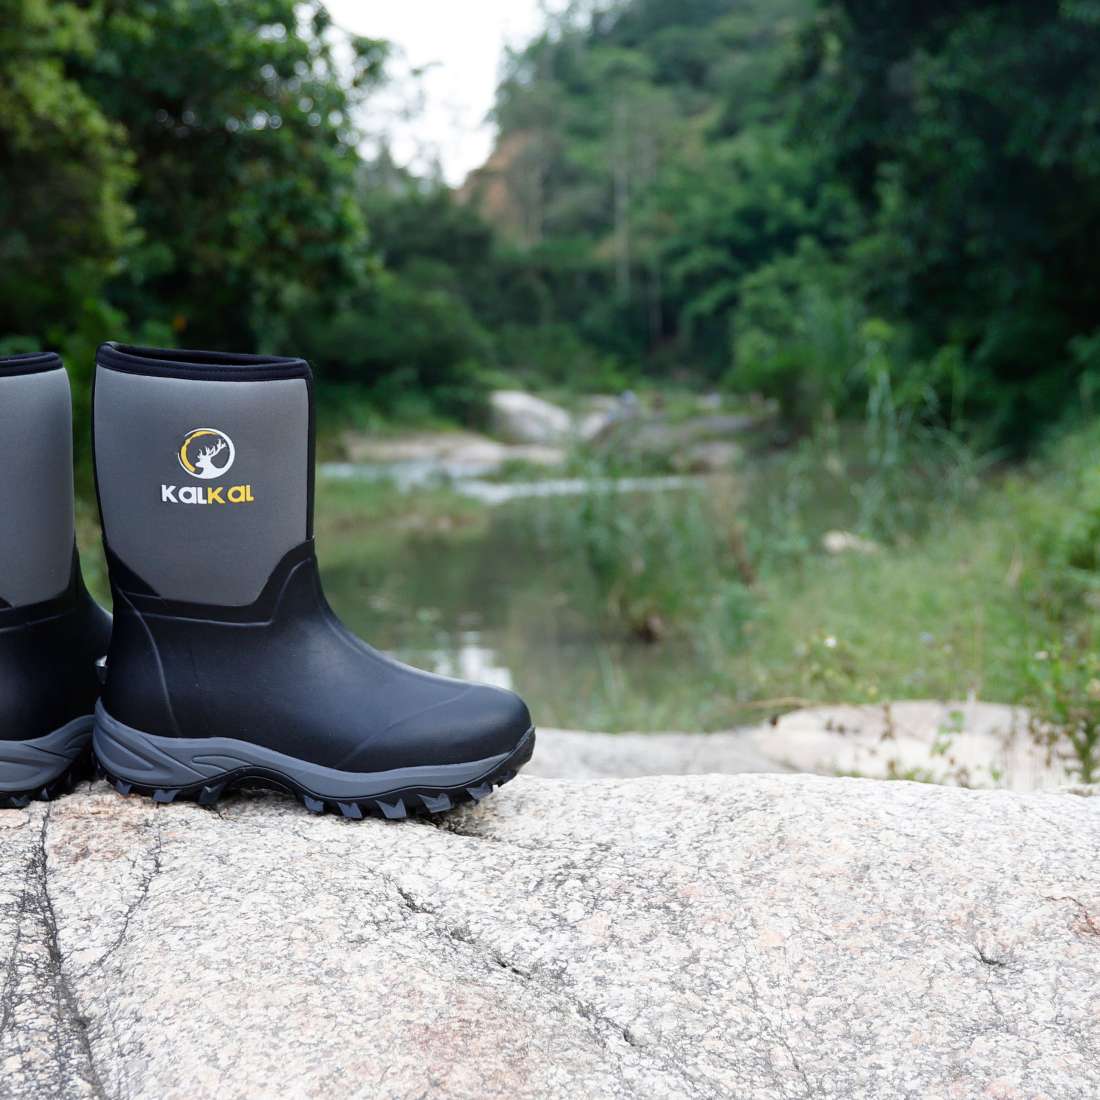 Kalkal insulated rubber boots